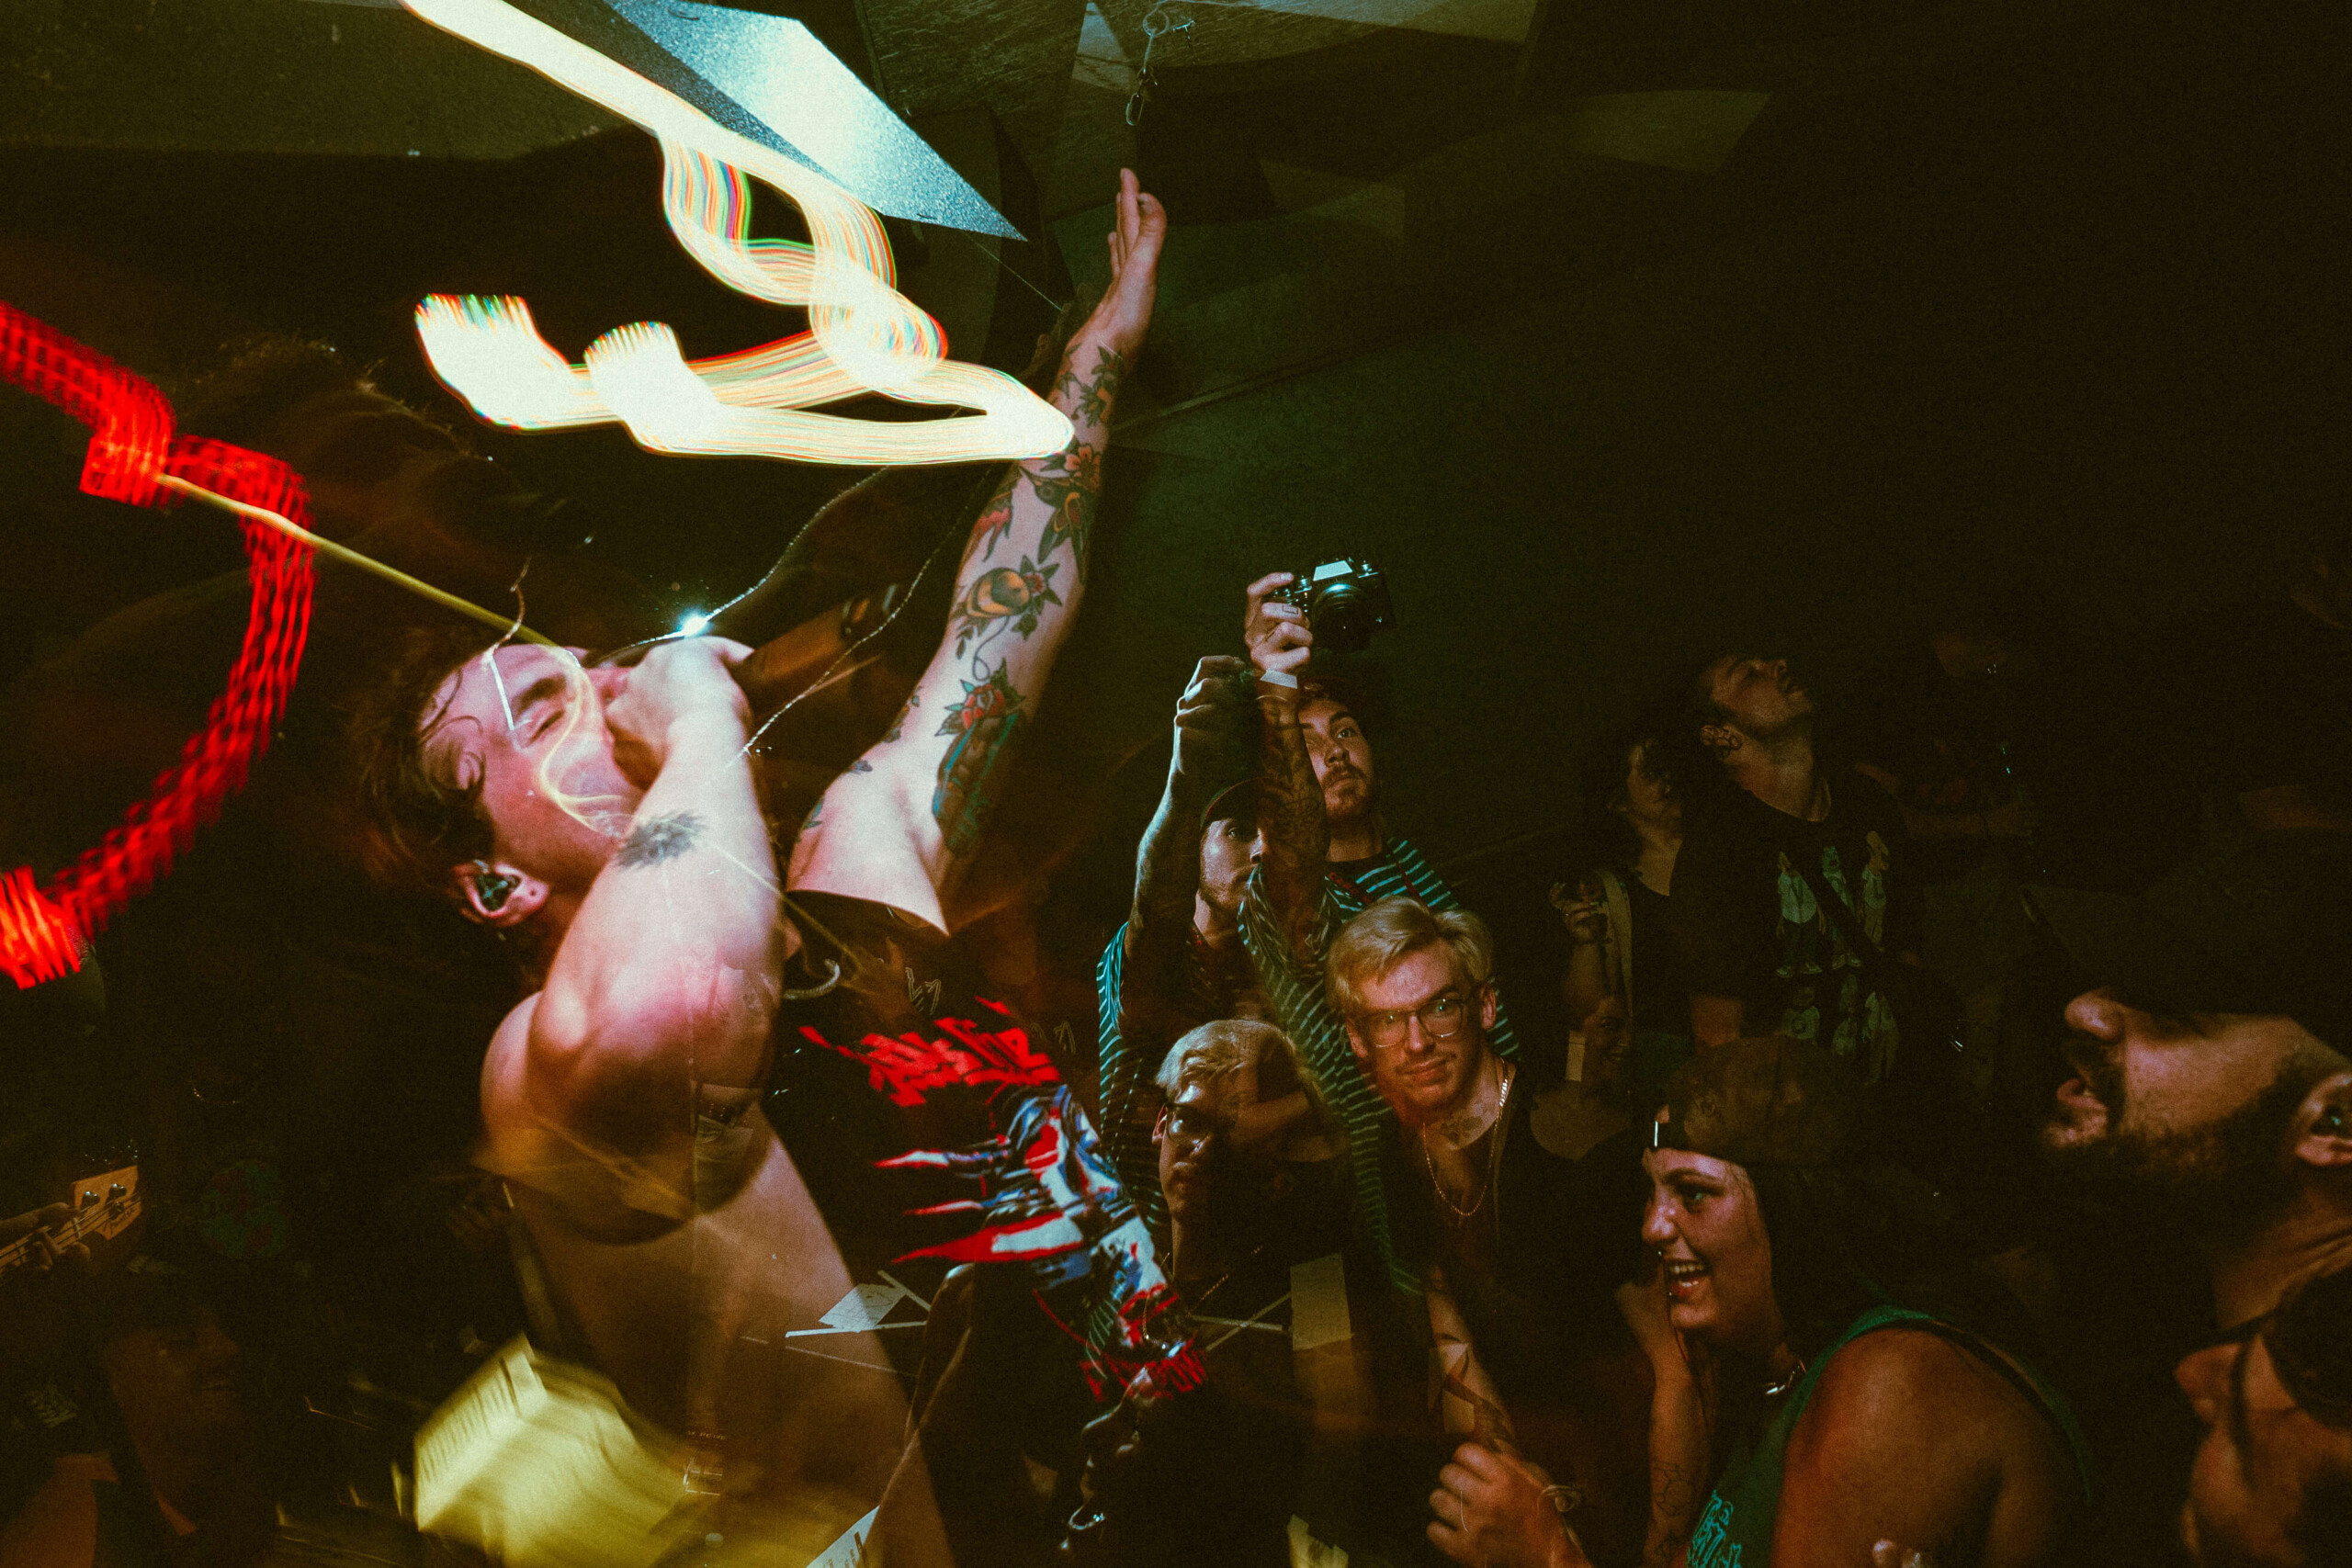 GALLERY: ‘Welcome To The AVOID And Friends Show’ Featuring AVOID & Dead Lakes